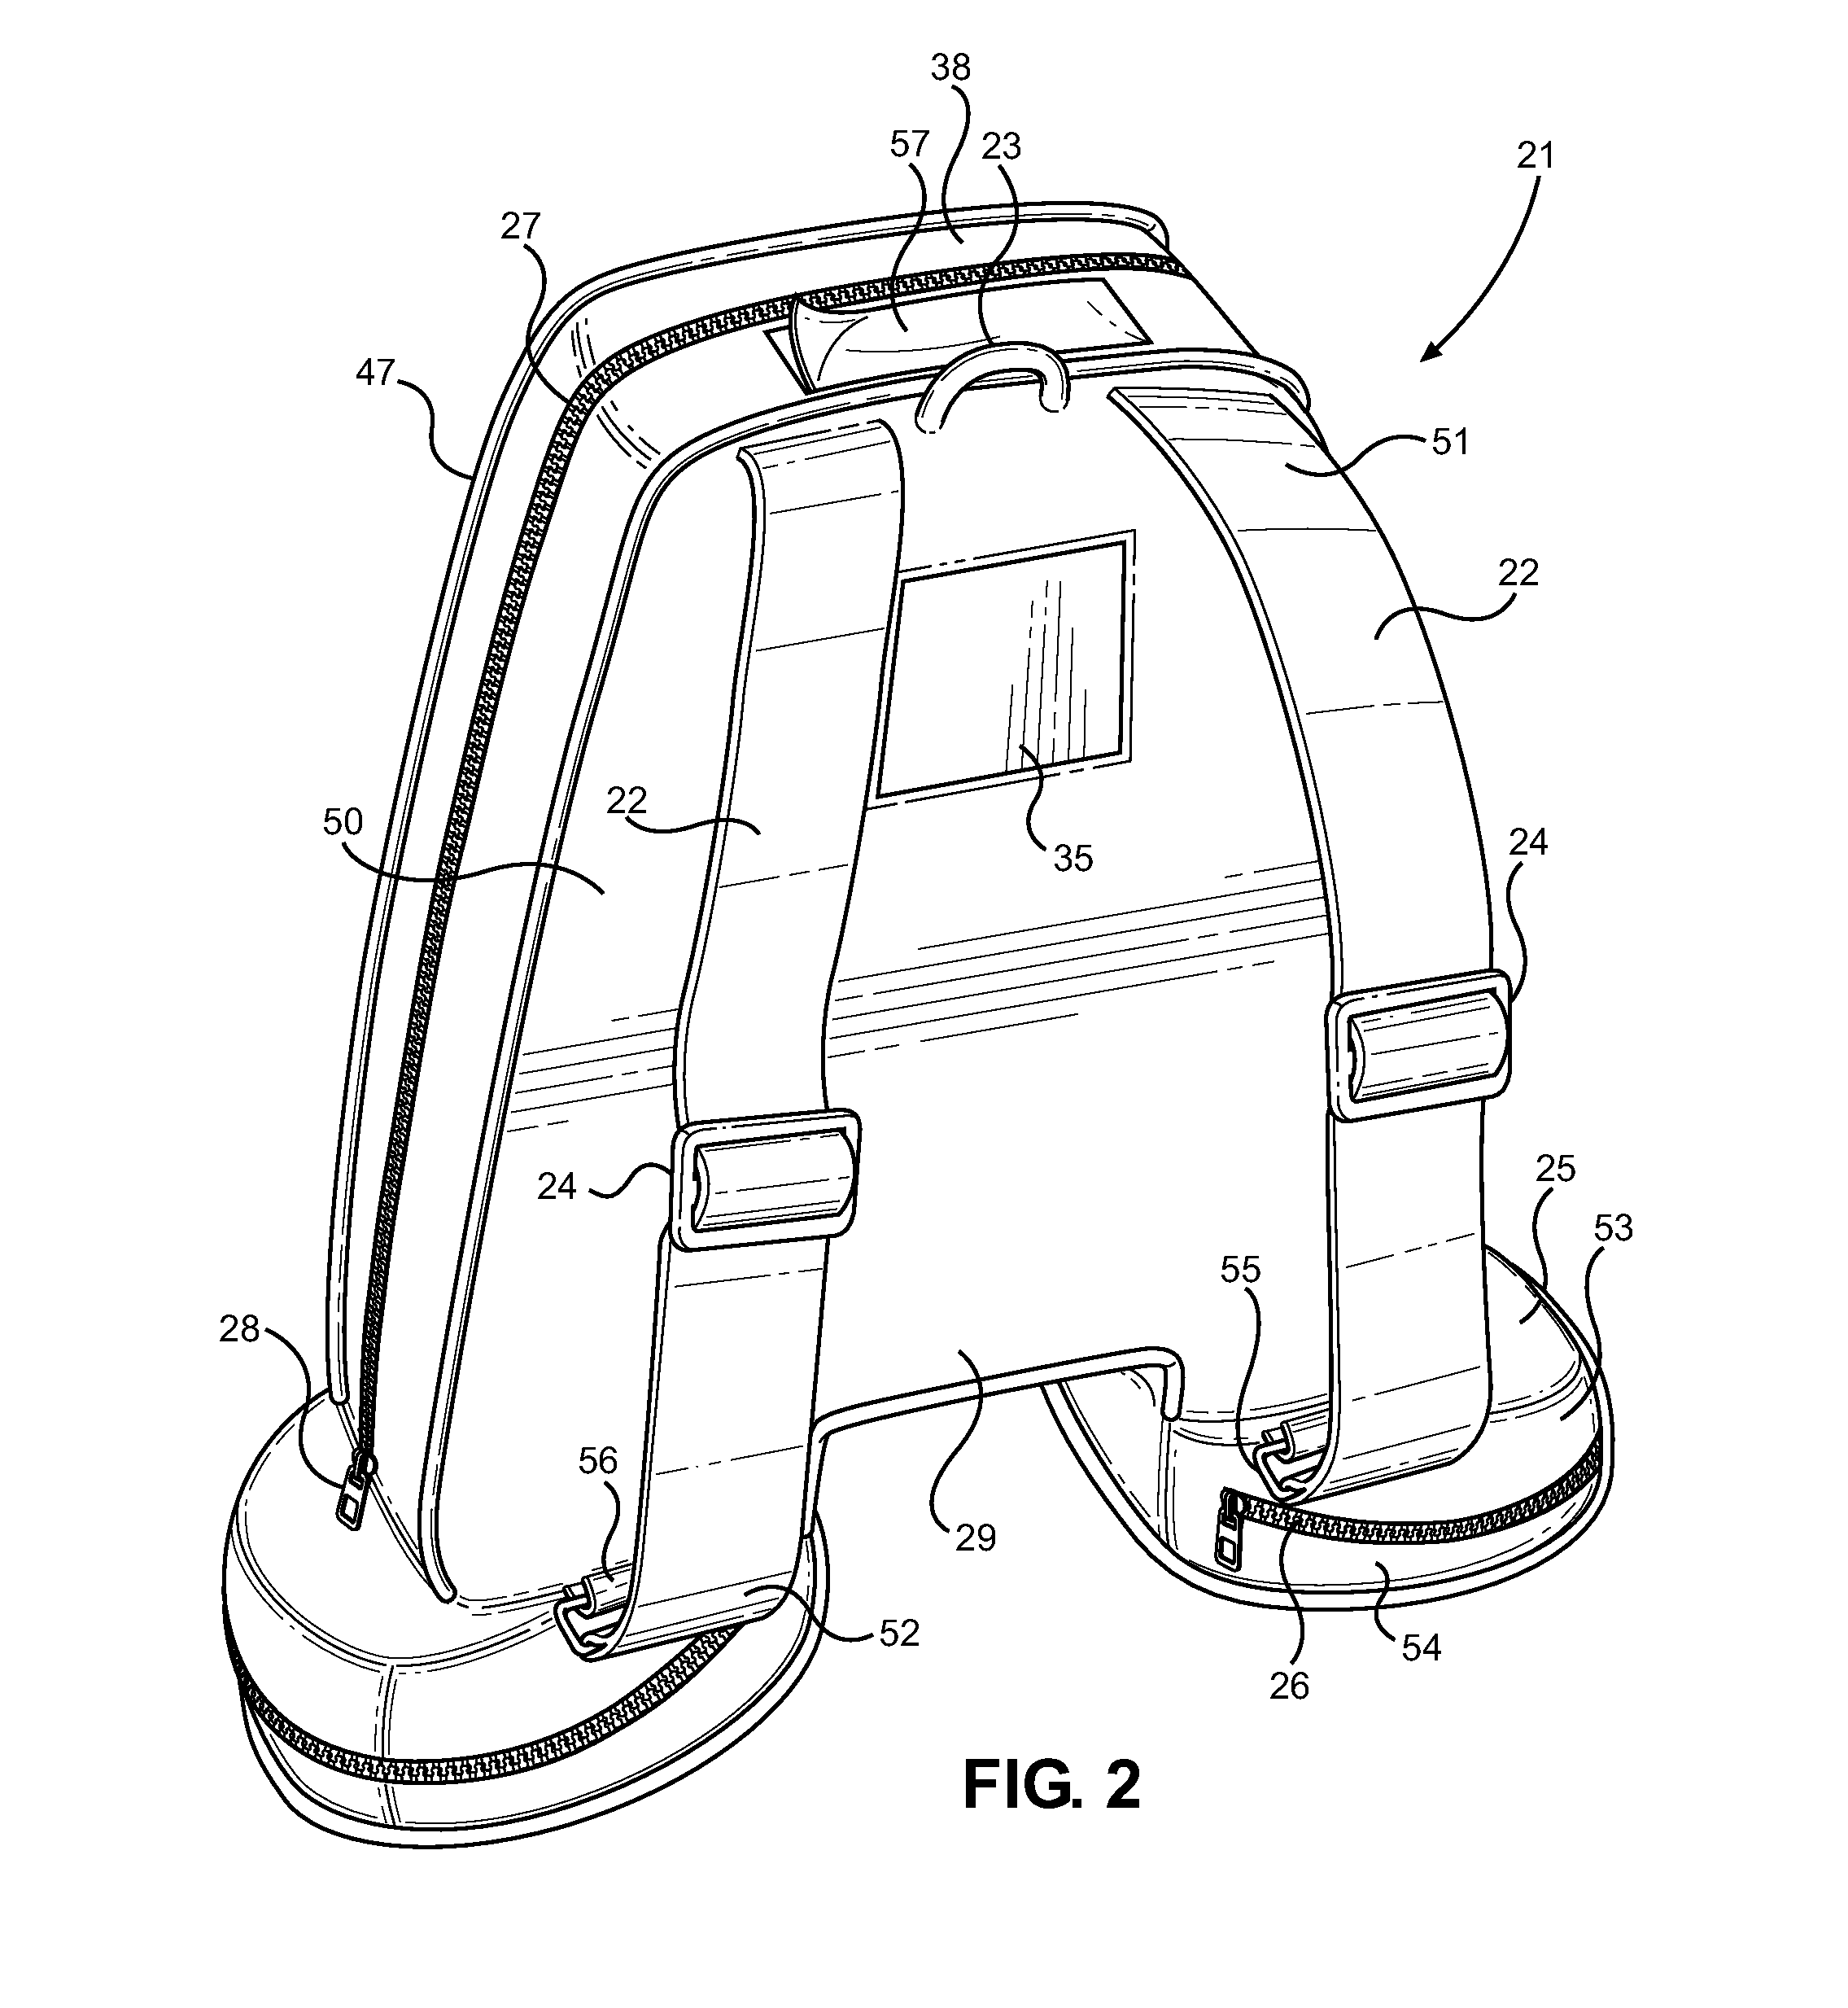 Compartmentalized Backpack with Imbedded Tracker Device